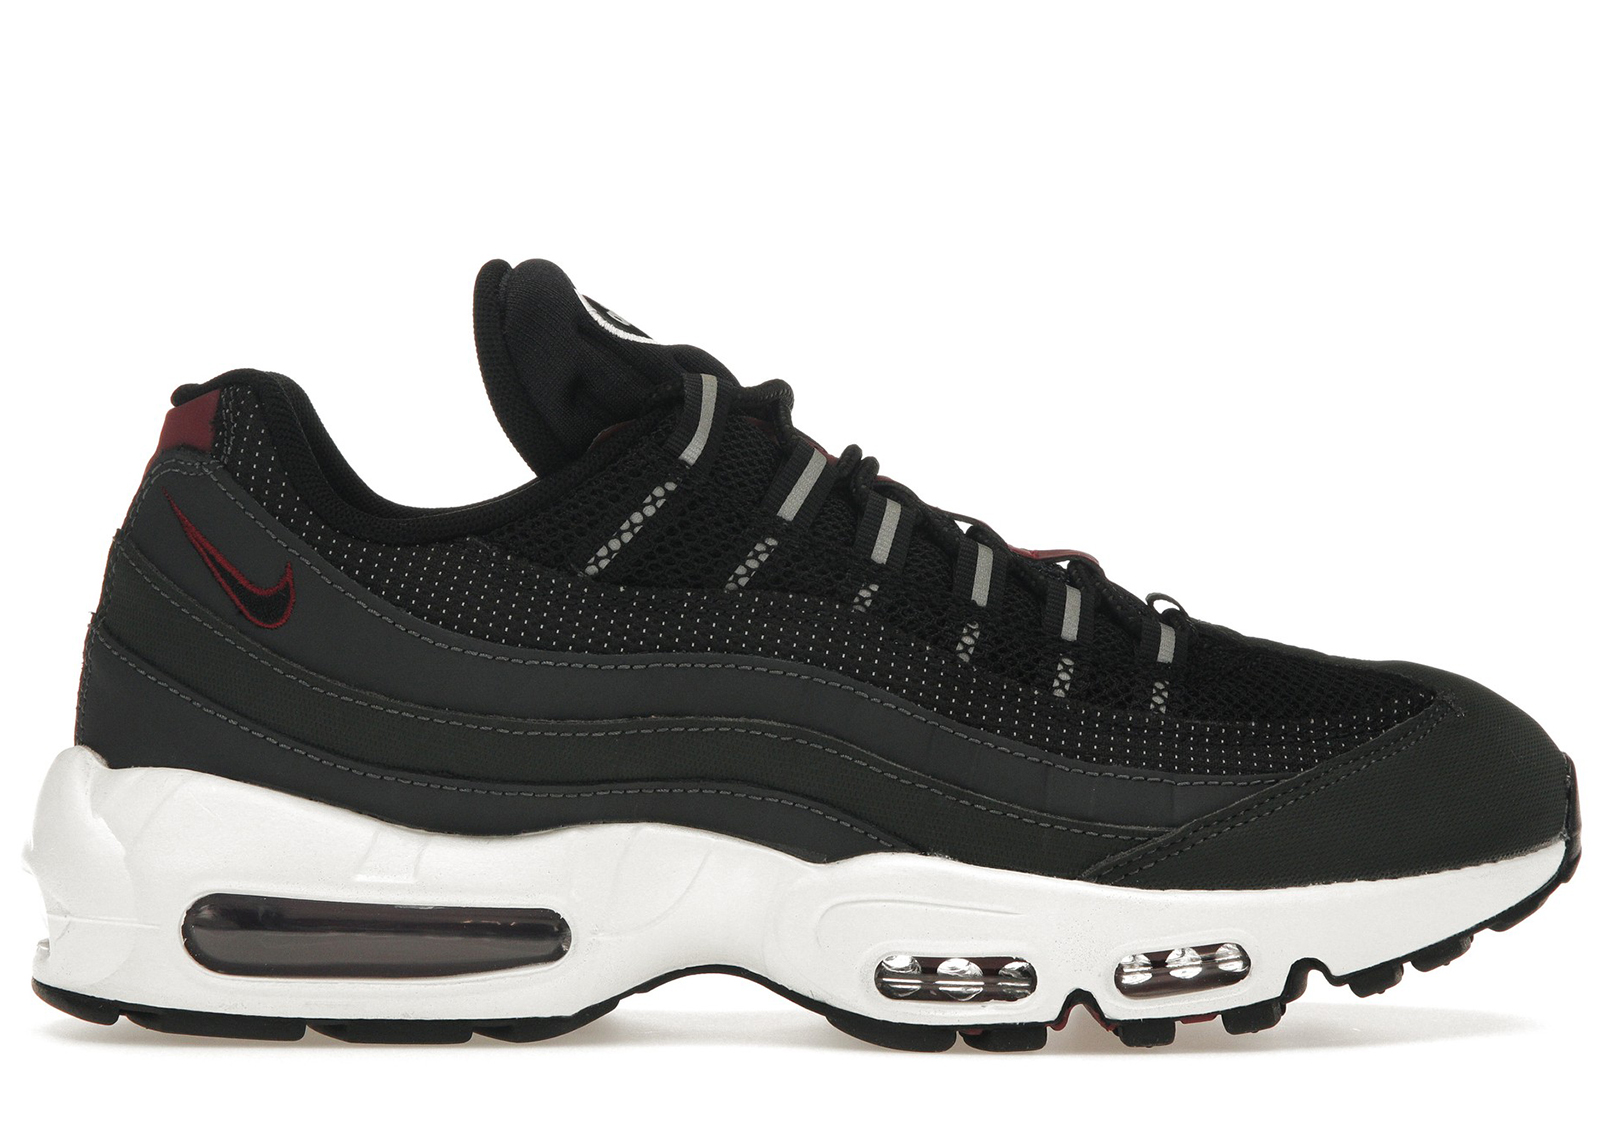 Nike Air Max 95 Anthracite Team Red Men's - DQ3982-001 - US